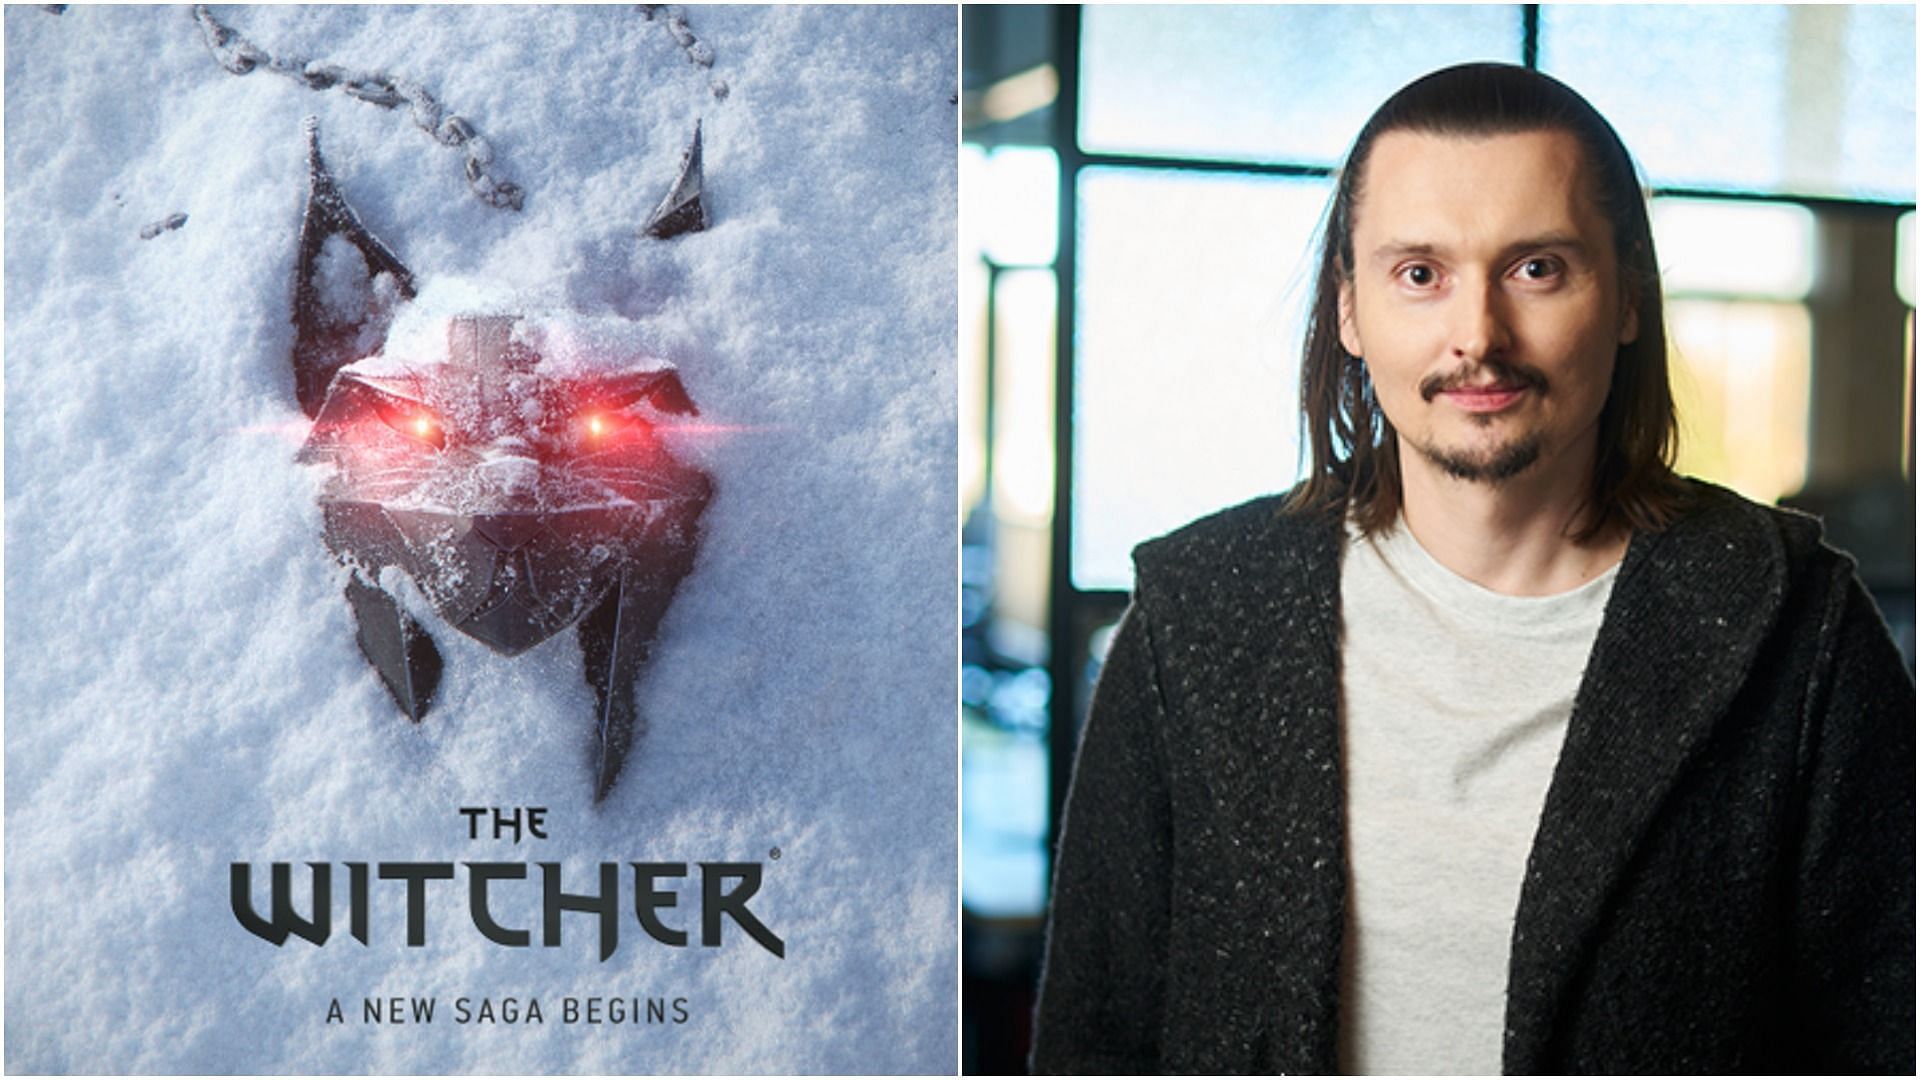 CD Projekt Red official gives hint about the medallion on the poster of The Witcher 4 (Images via CD Projekt Red)